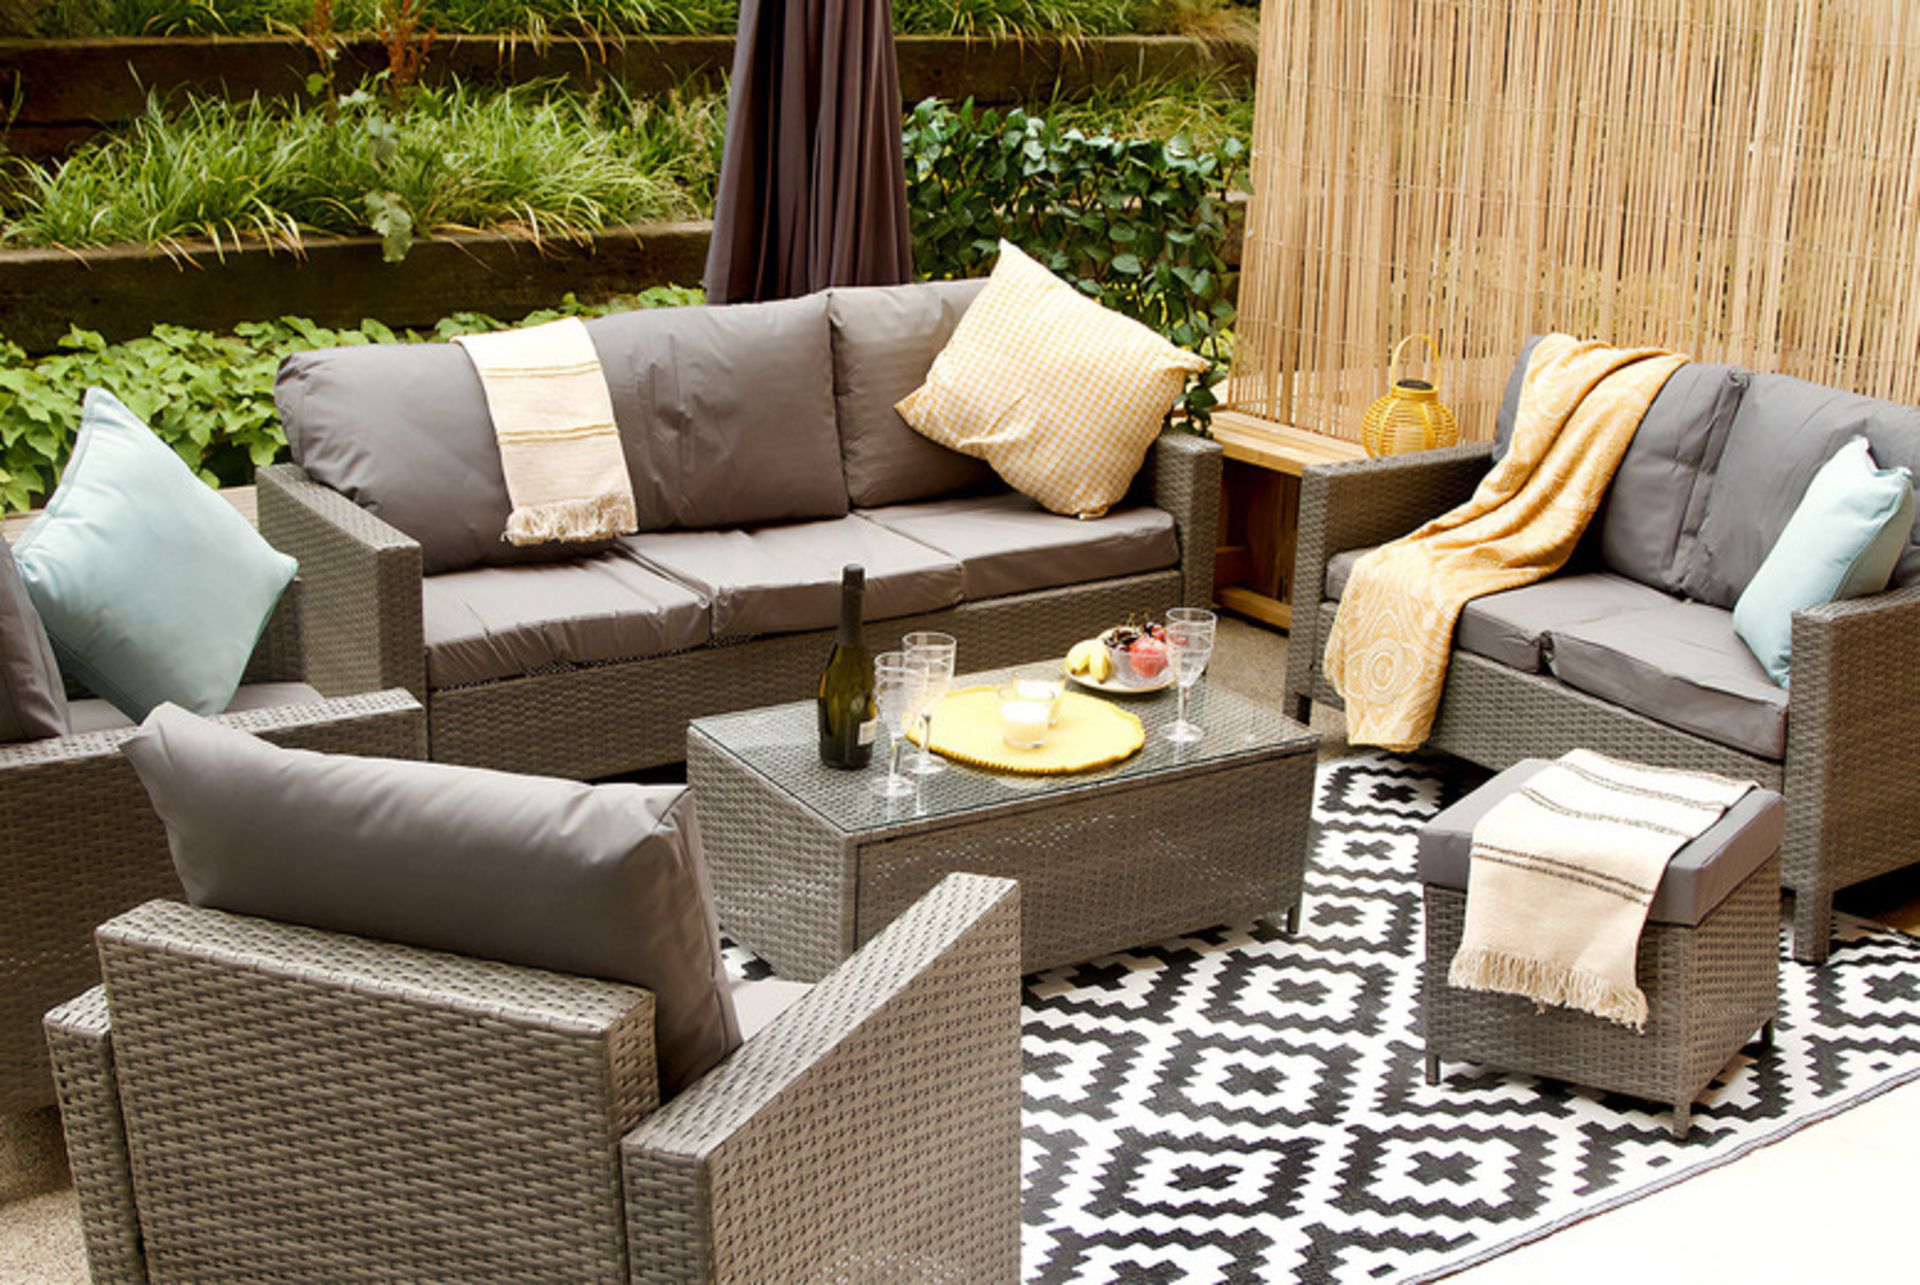 Free Delivery - 8-Seater Greenwich Rattan Chair & Sofa Garden Furniture Set - Grey